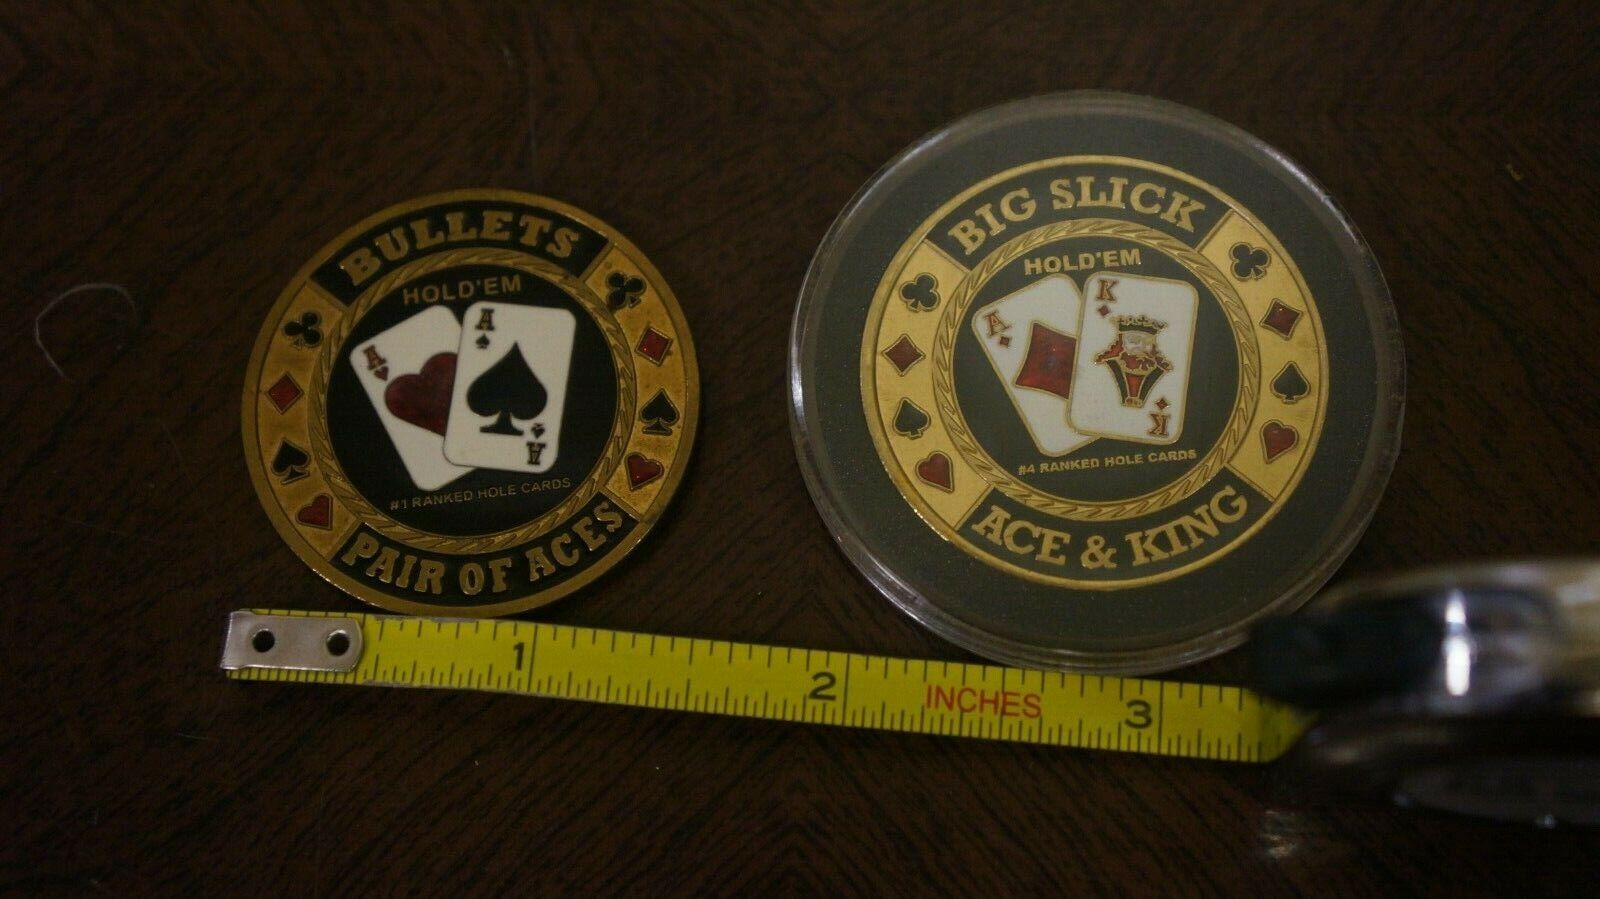 Casino Poker Card Guard Covr Protector BIG SLICK-BULLETS PAIR OF ACES GOLD color Без бренда